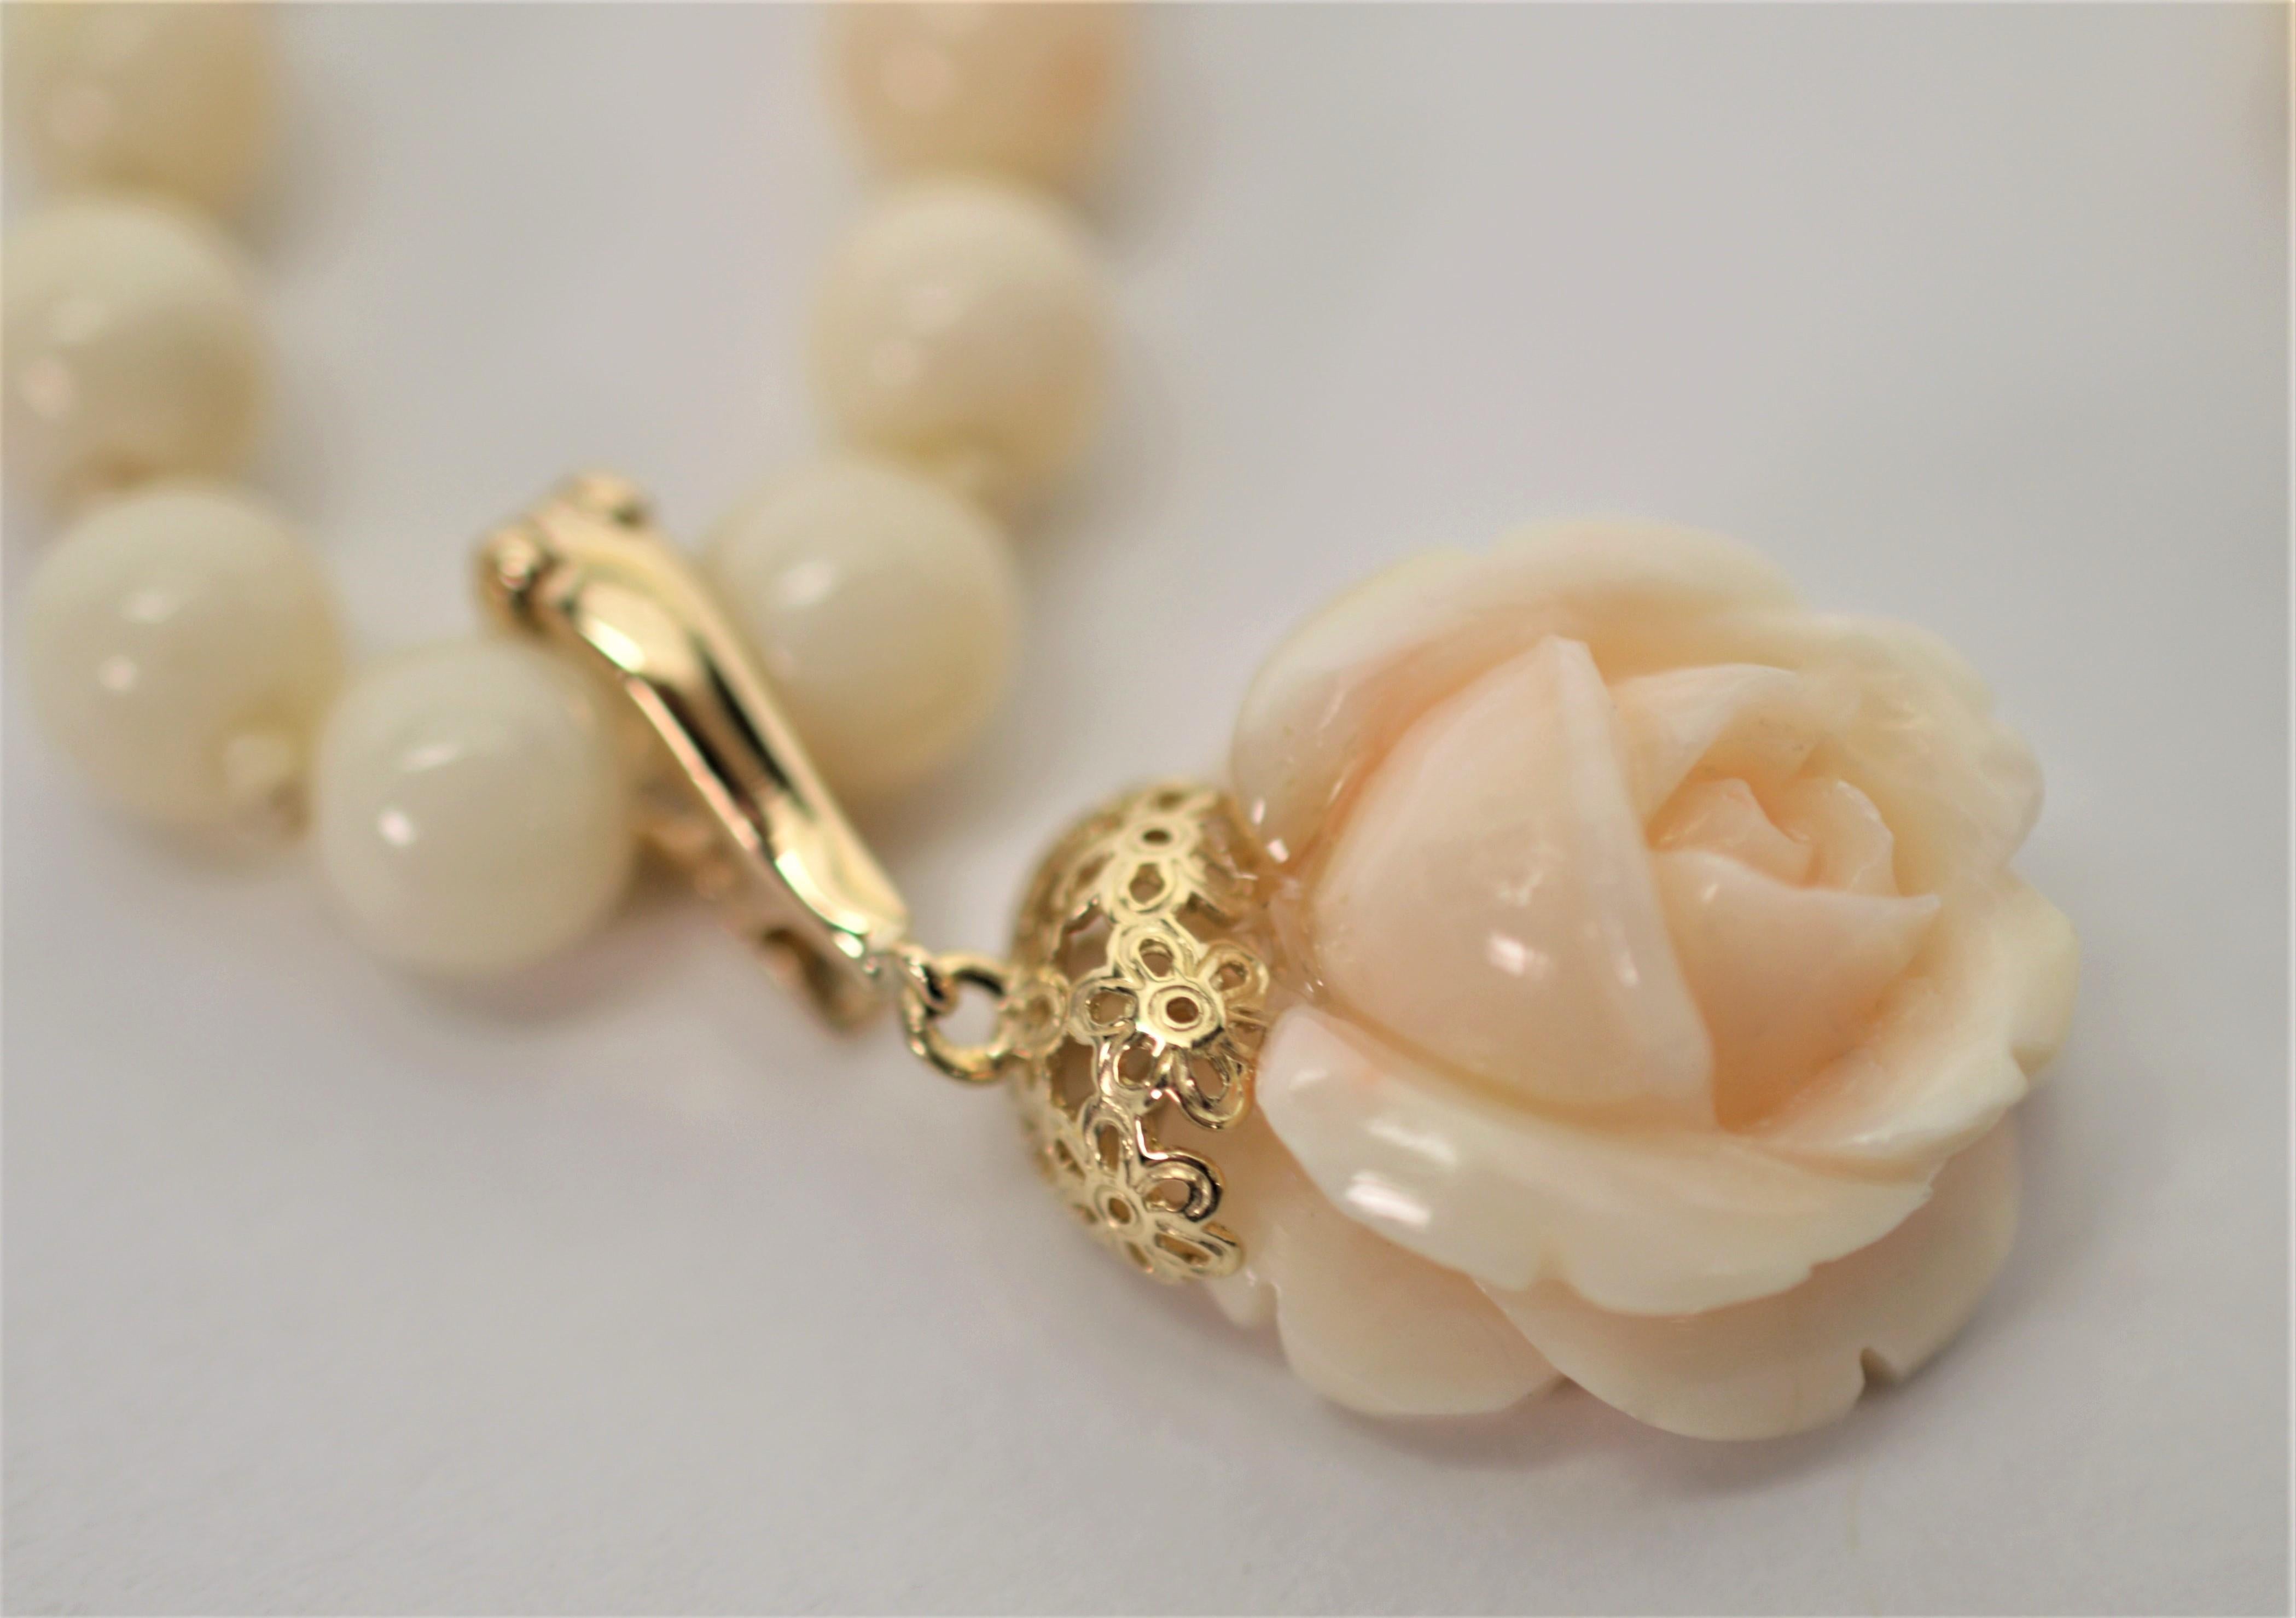 Creamy blush color 6.5 mm natural coral beads on this fourteen inch strand lead to a beautiful carved coral single rose bud pendant.
The rose bud feature measures approximately 17.5 mm. With fourteen carat gold findings, the rose pendant is fitted